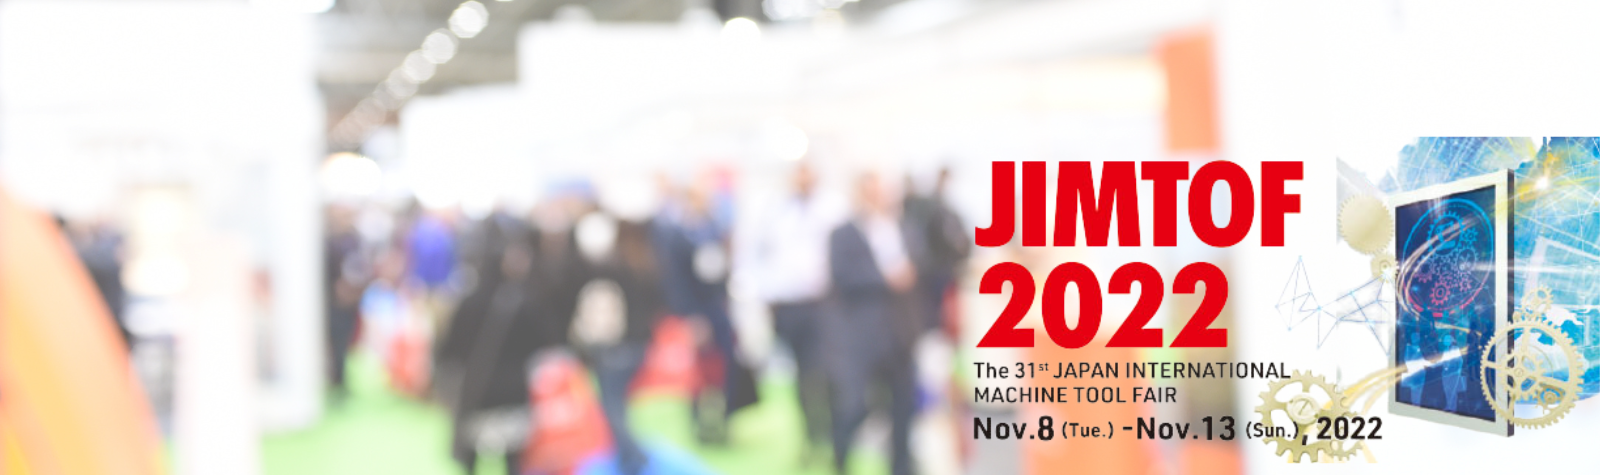 Join Us at JIMTOF 2022 in Tokyo!